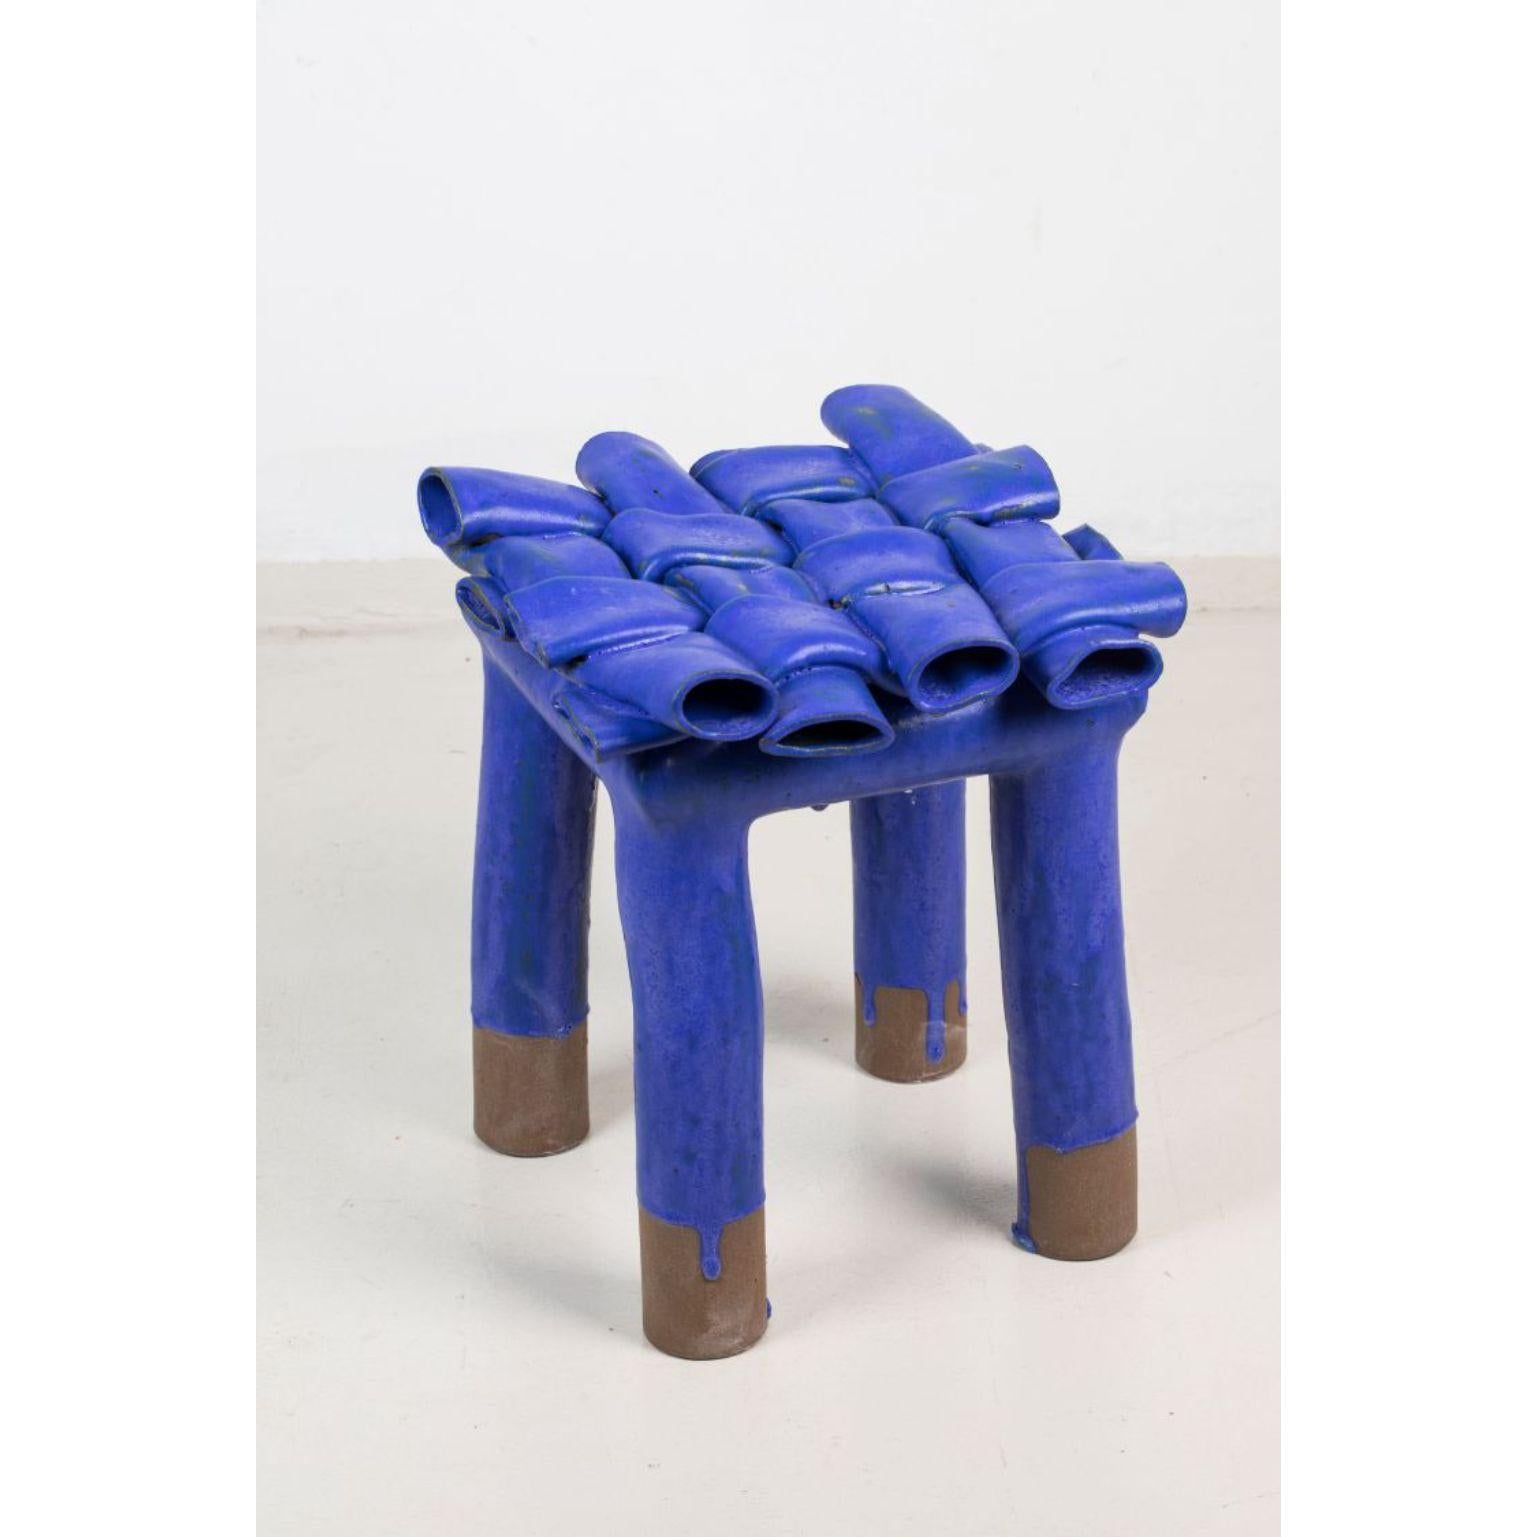 Blue stool by Milan Pekar
Dimensions: W40 x D40 x H42 cm
Materials: Glaze, clay

Handmade in the Czech Republic

Also available: Different colors and patterns.

Established own studio August 2009 – Focus mainly on porcelain, developing own